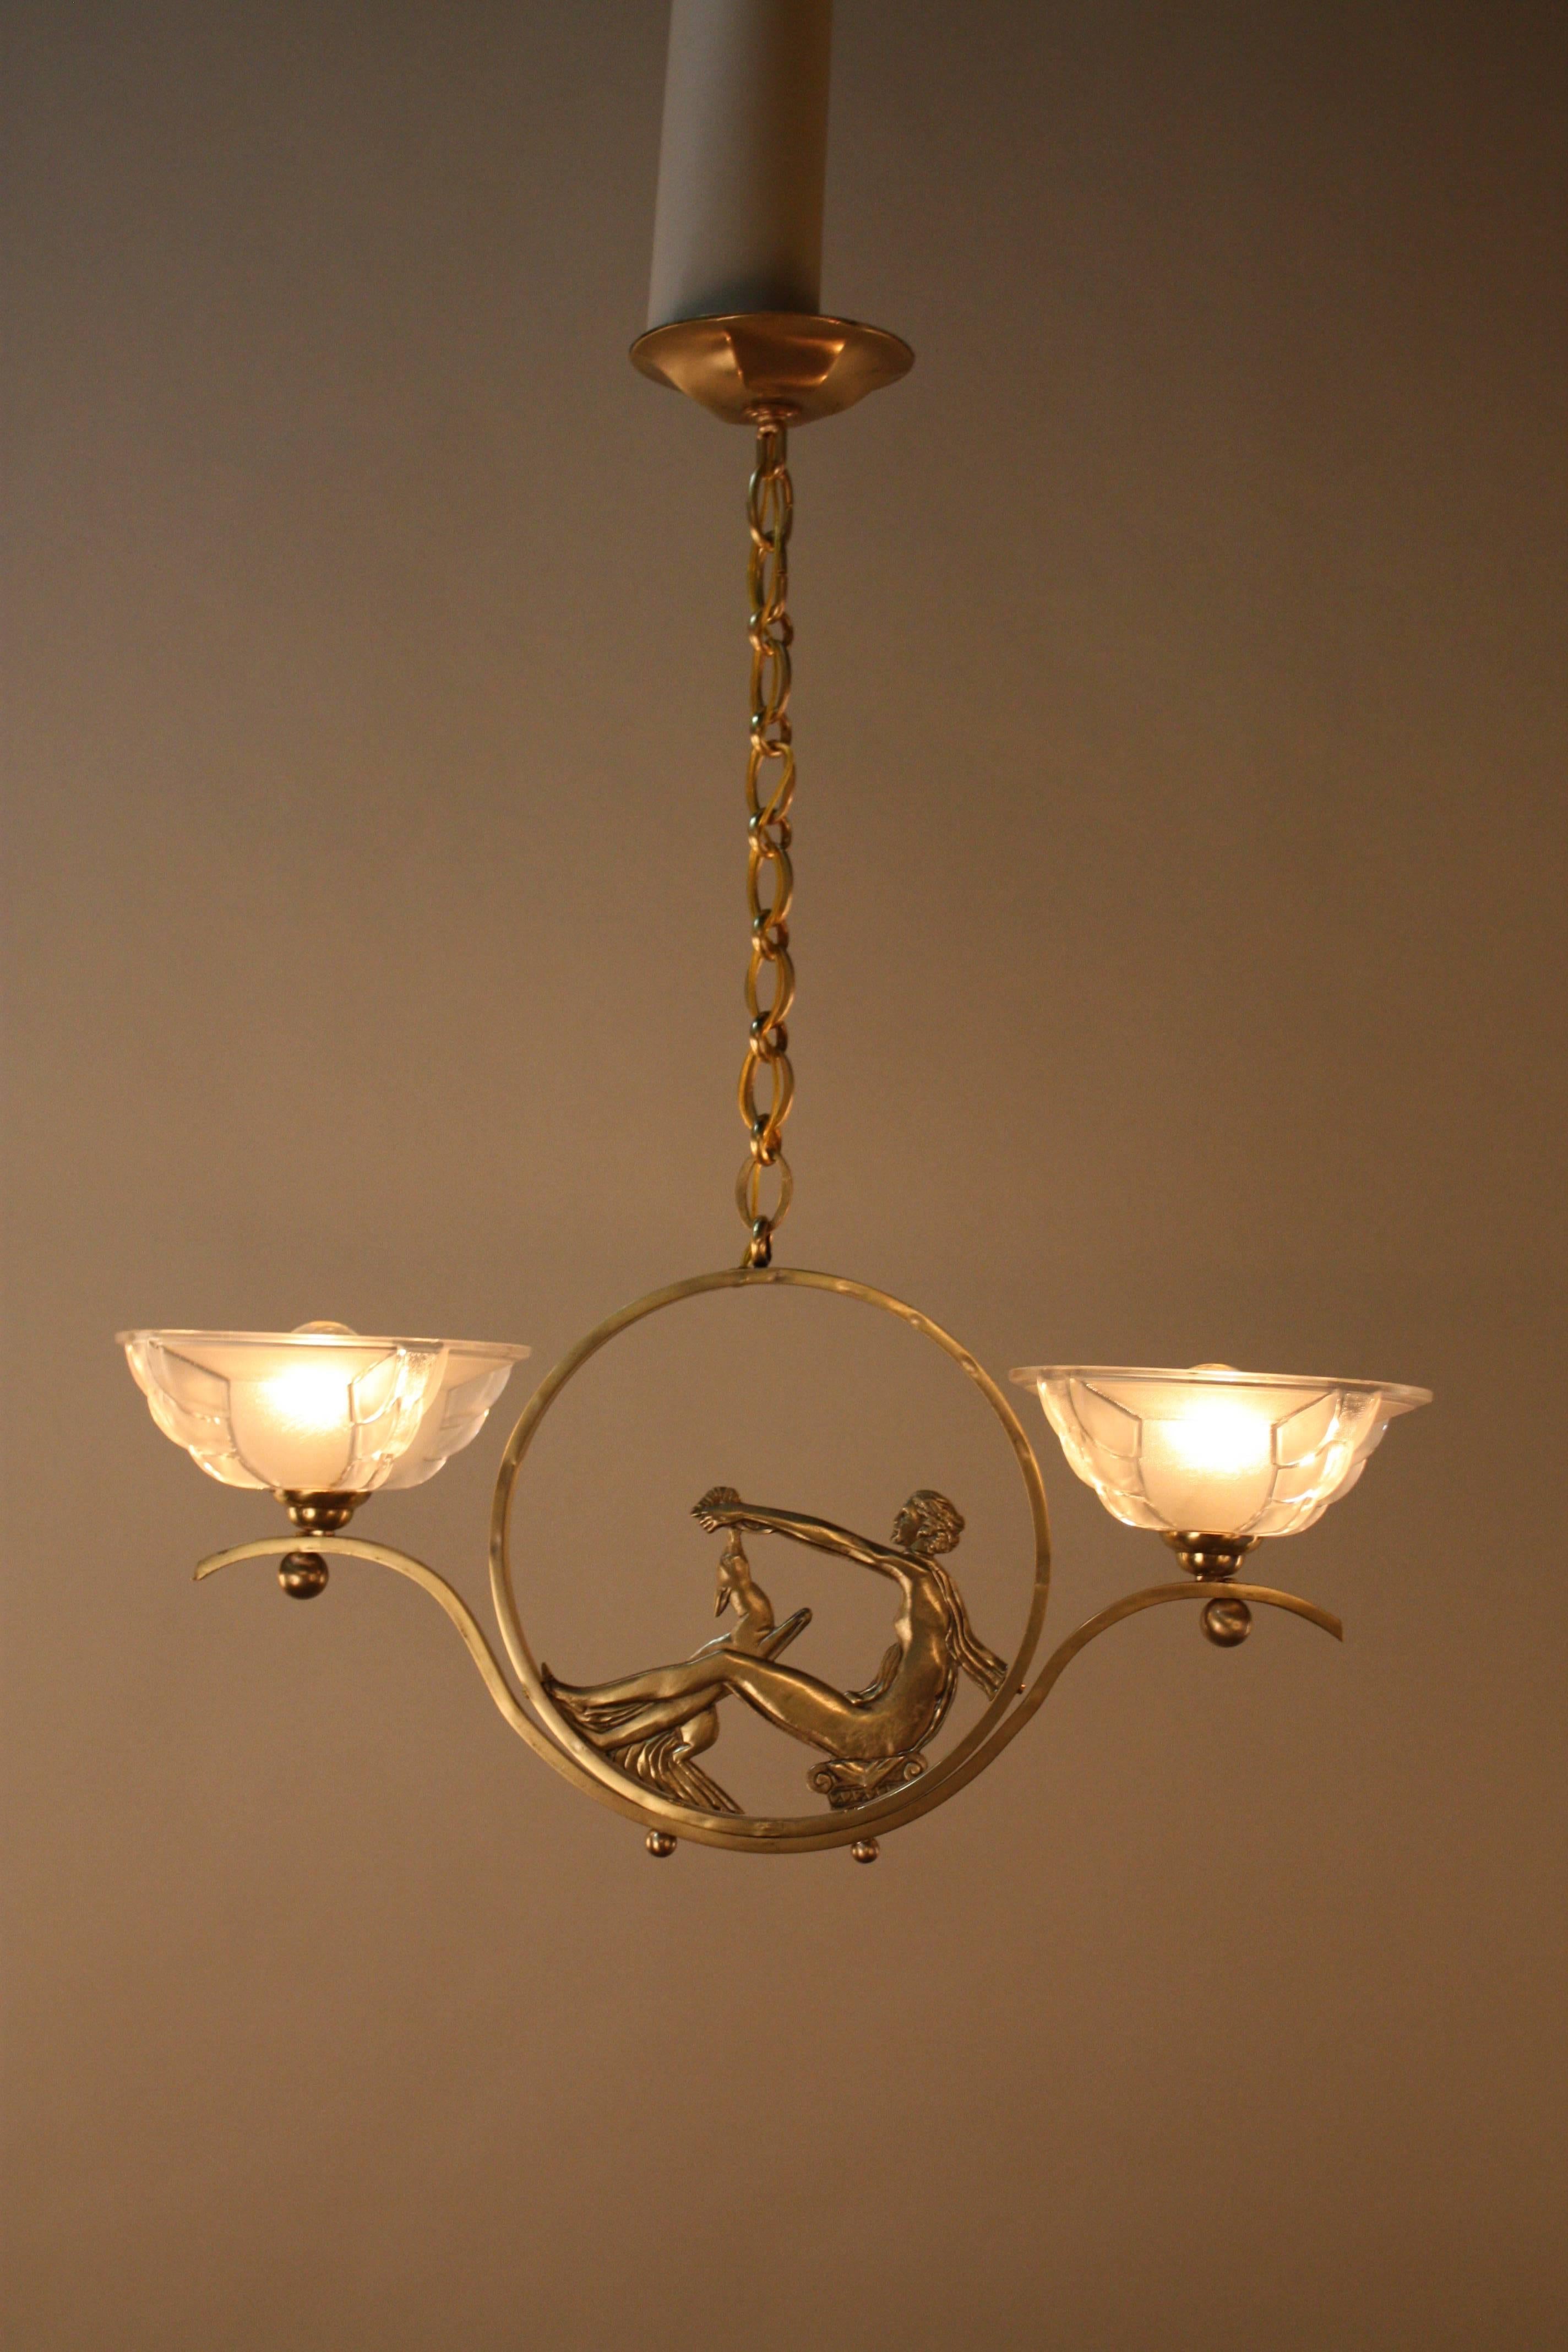 Beautiful double light French bronze Art Deco chandelier.
Minimum height fully installed is 18